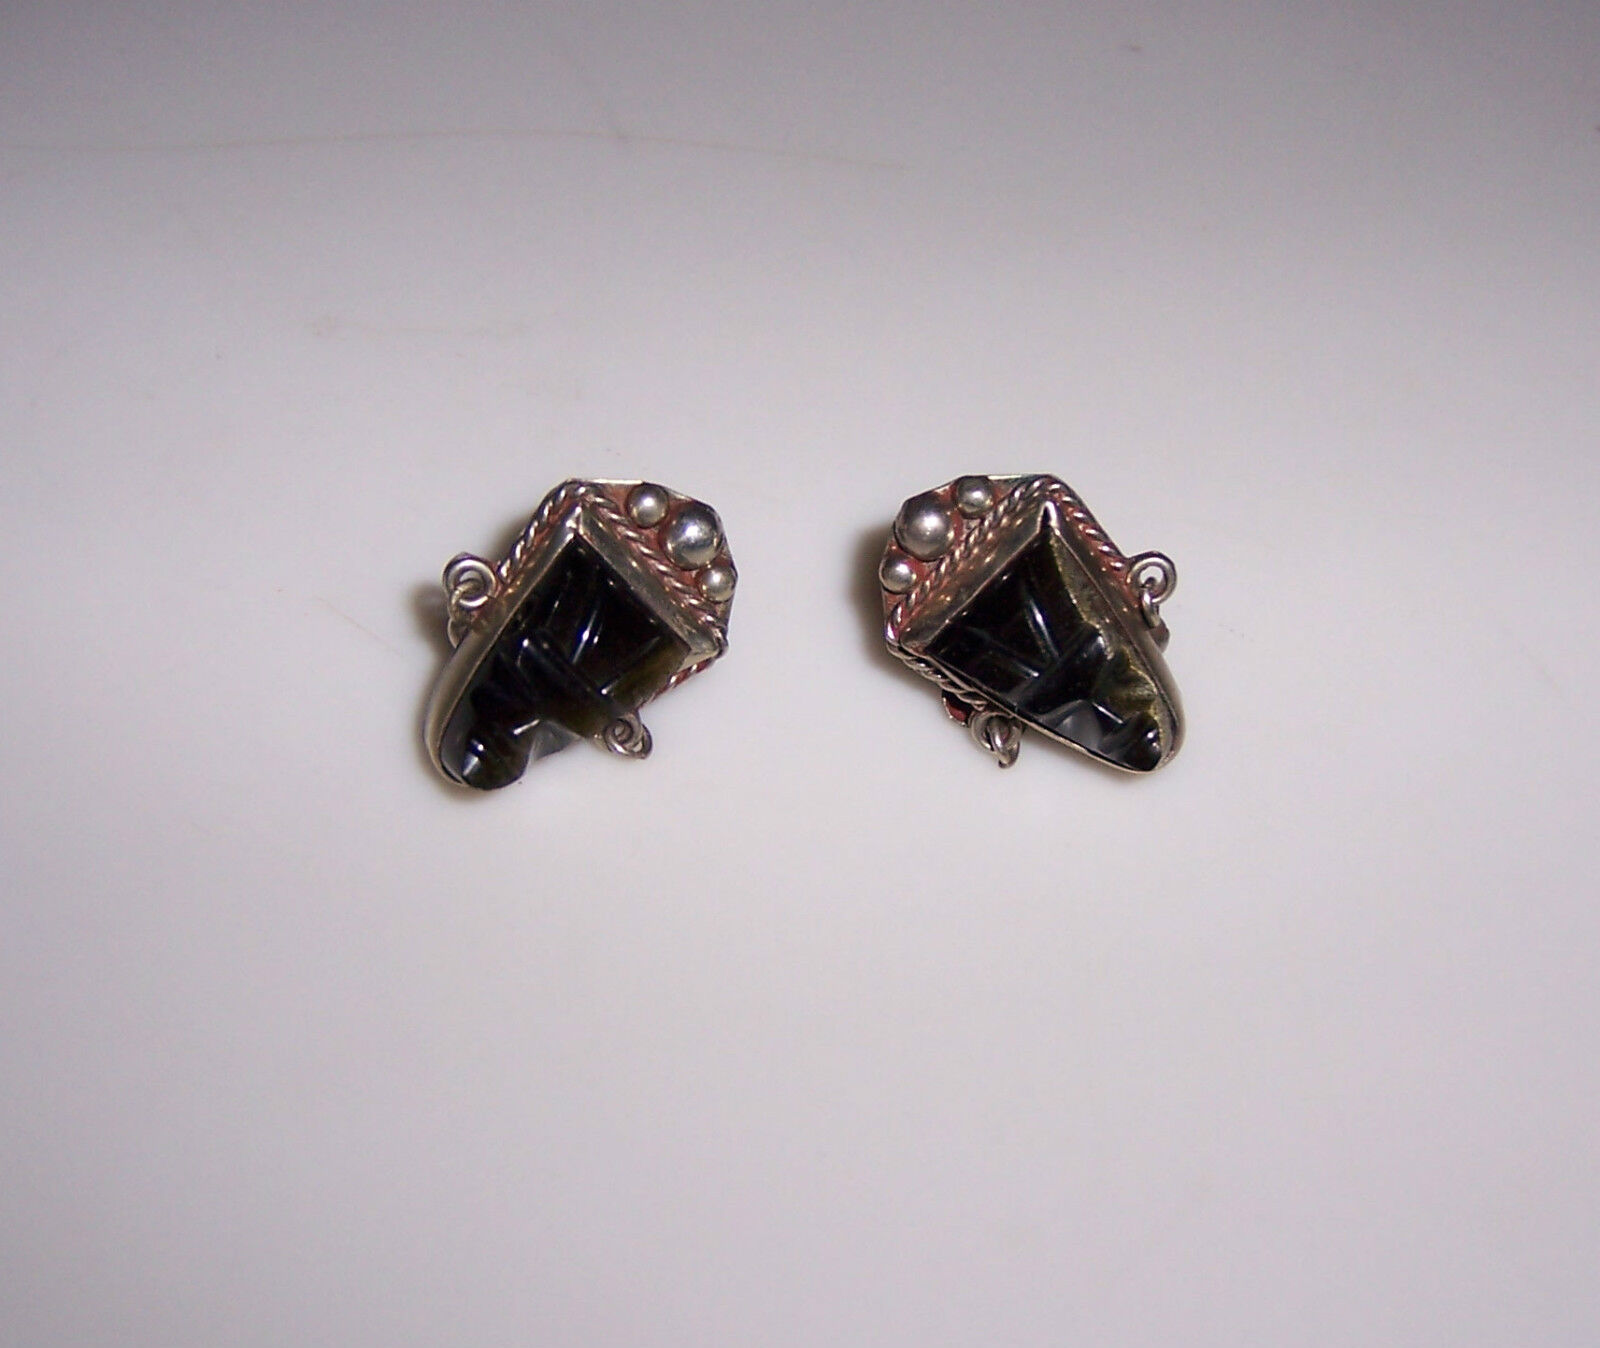 HECHO EN MEXICO  STERLING SILVER, WITH HAND CARVED BLACK ONYX FACES  EARRINGS